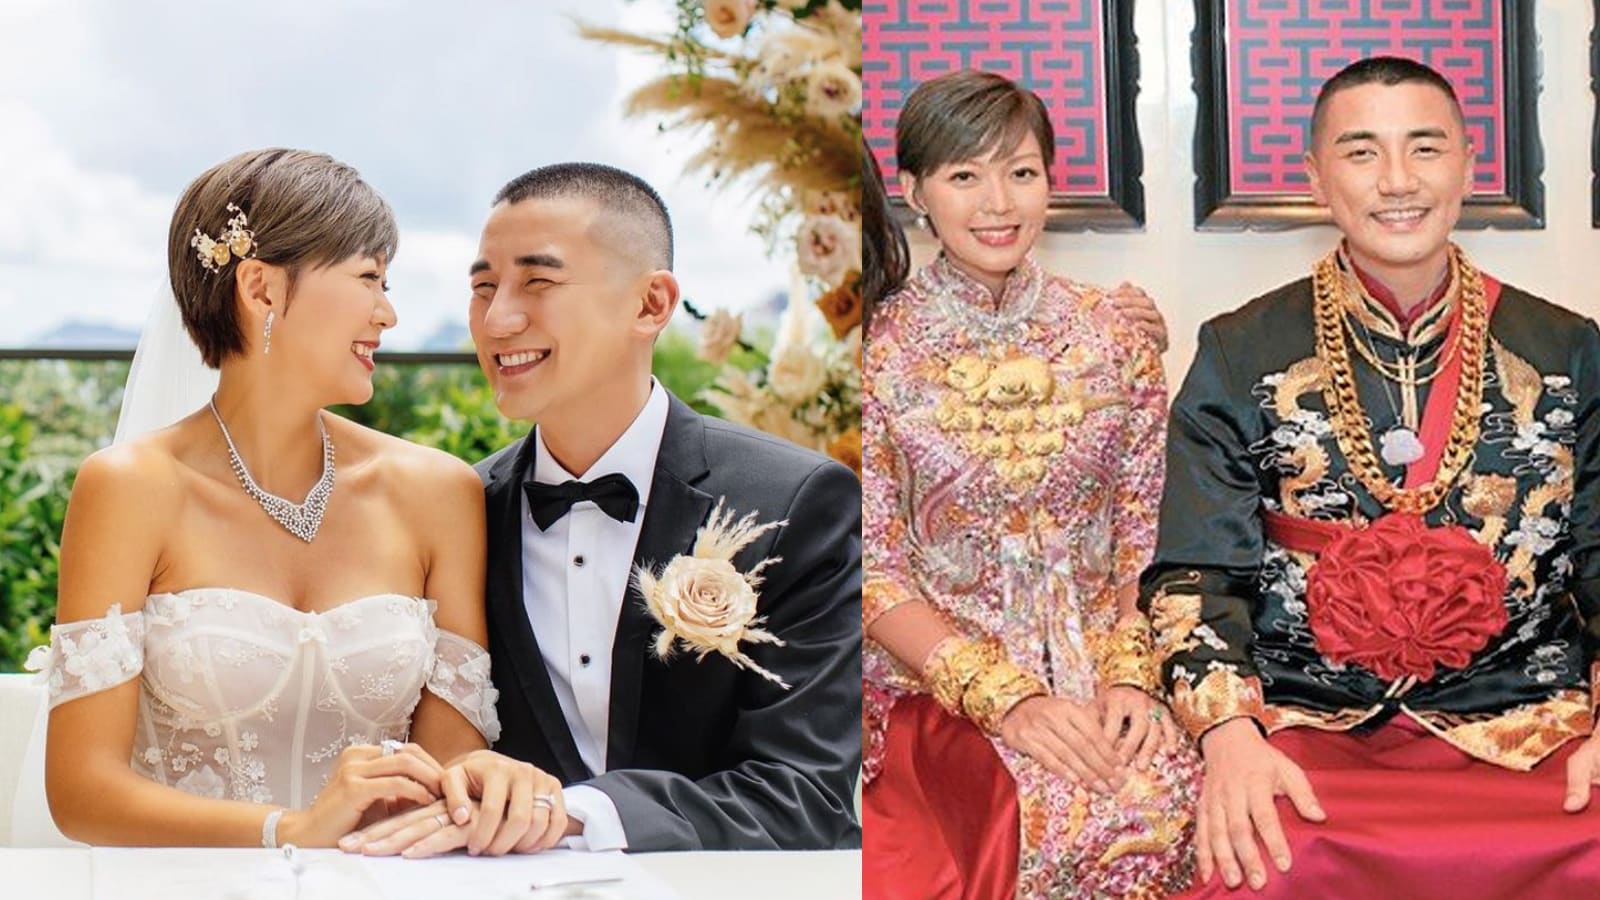 TVB Actor Tony Hung Reveals His Bride Is 4 Months Pregnant At Their Wedding